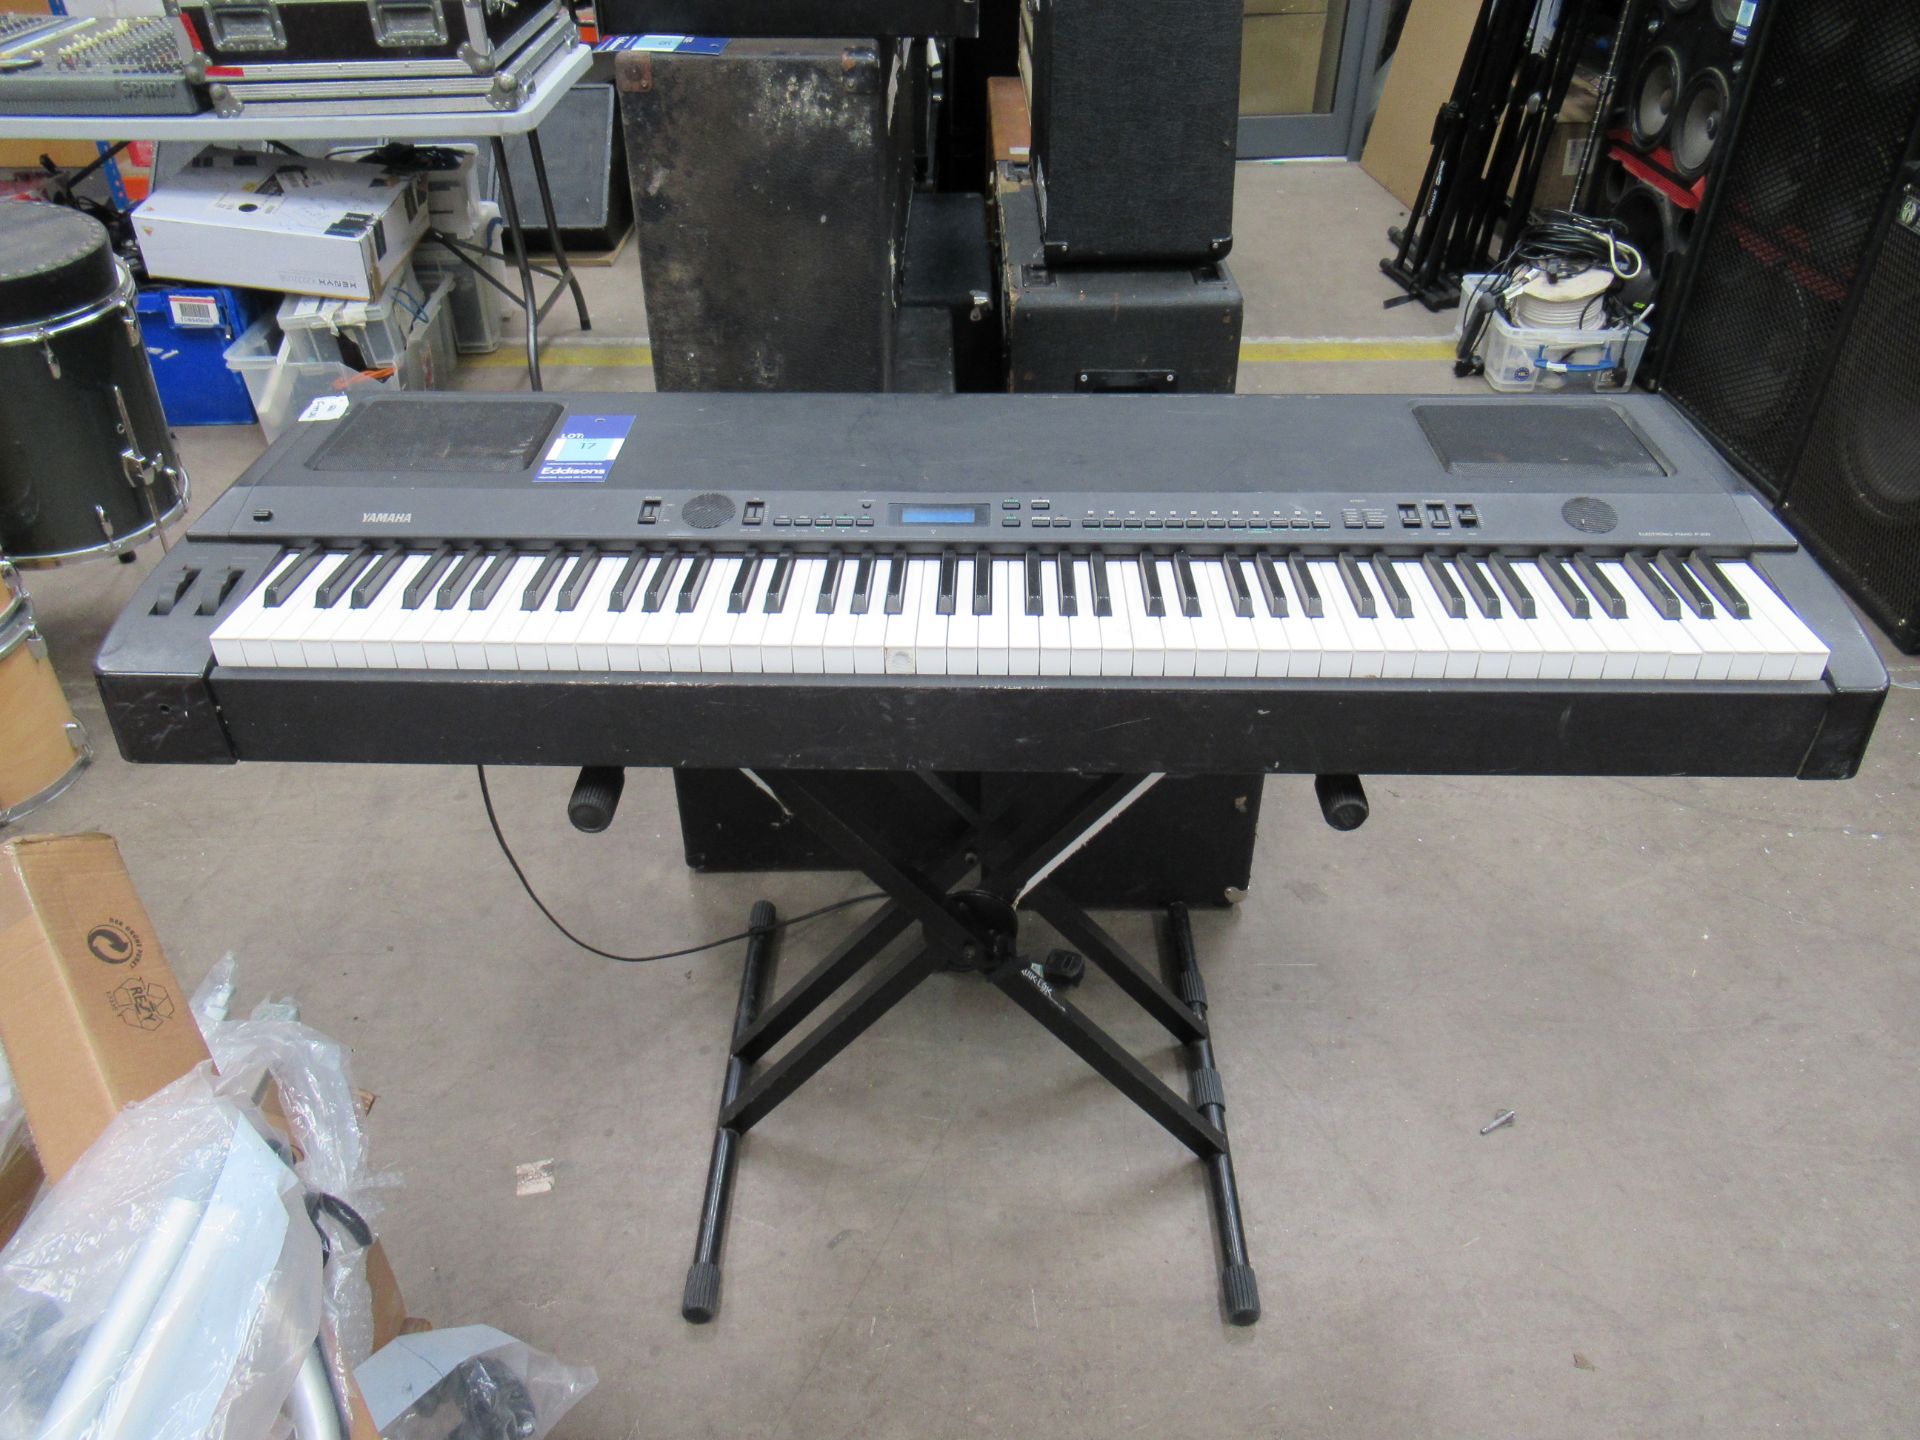 Yamaha 'Electric Piano' Model P-200 on stand